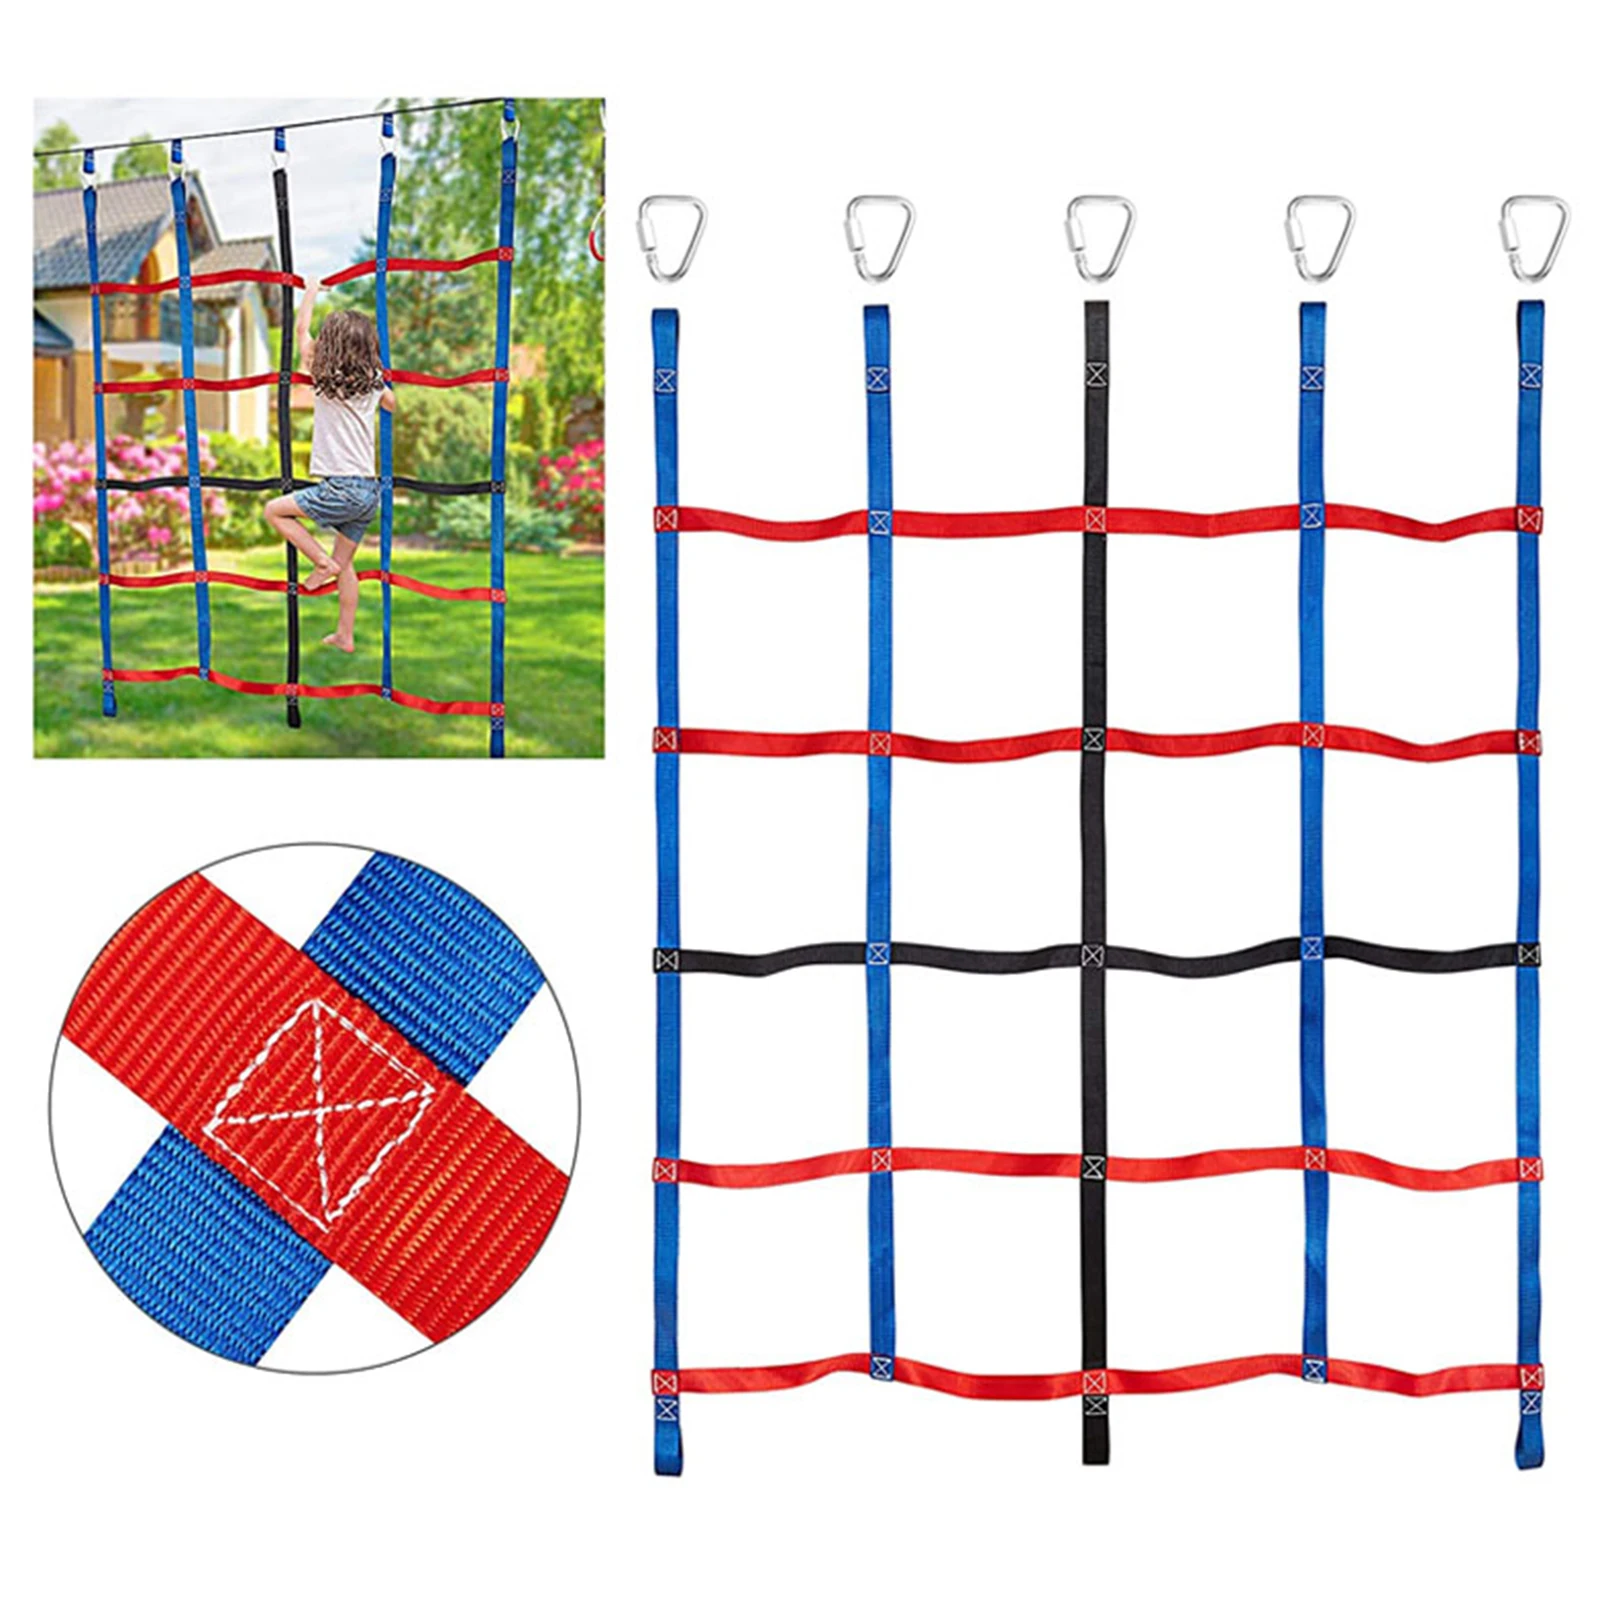 

Climbing Net Polyester Climbing Cargo Net Rope Ladder for Kids Outdoor Treehouse Gym Playground Obstacle Course Training Net